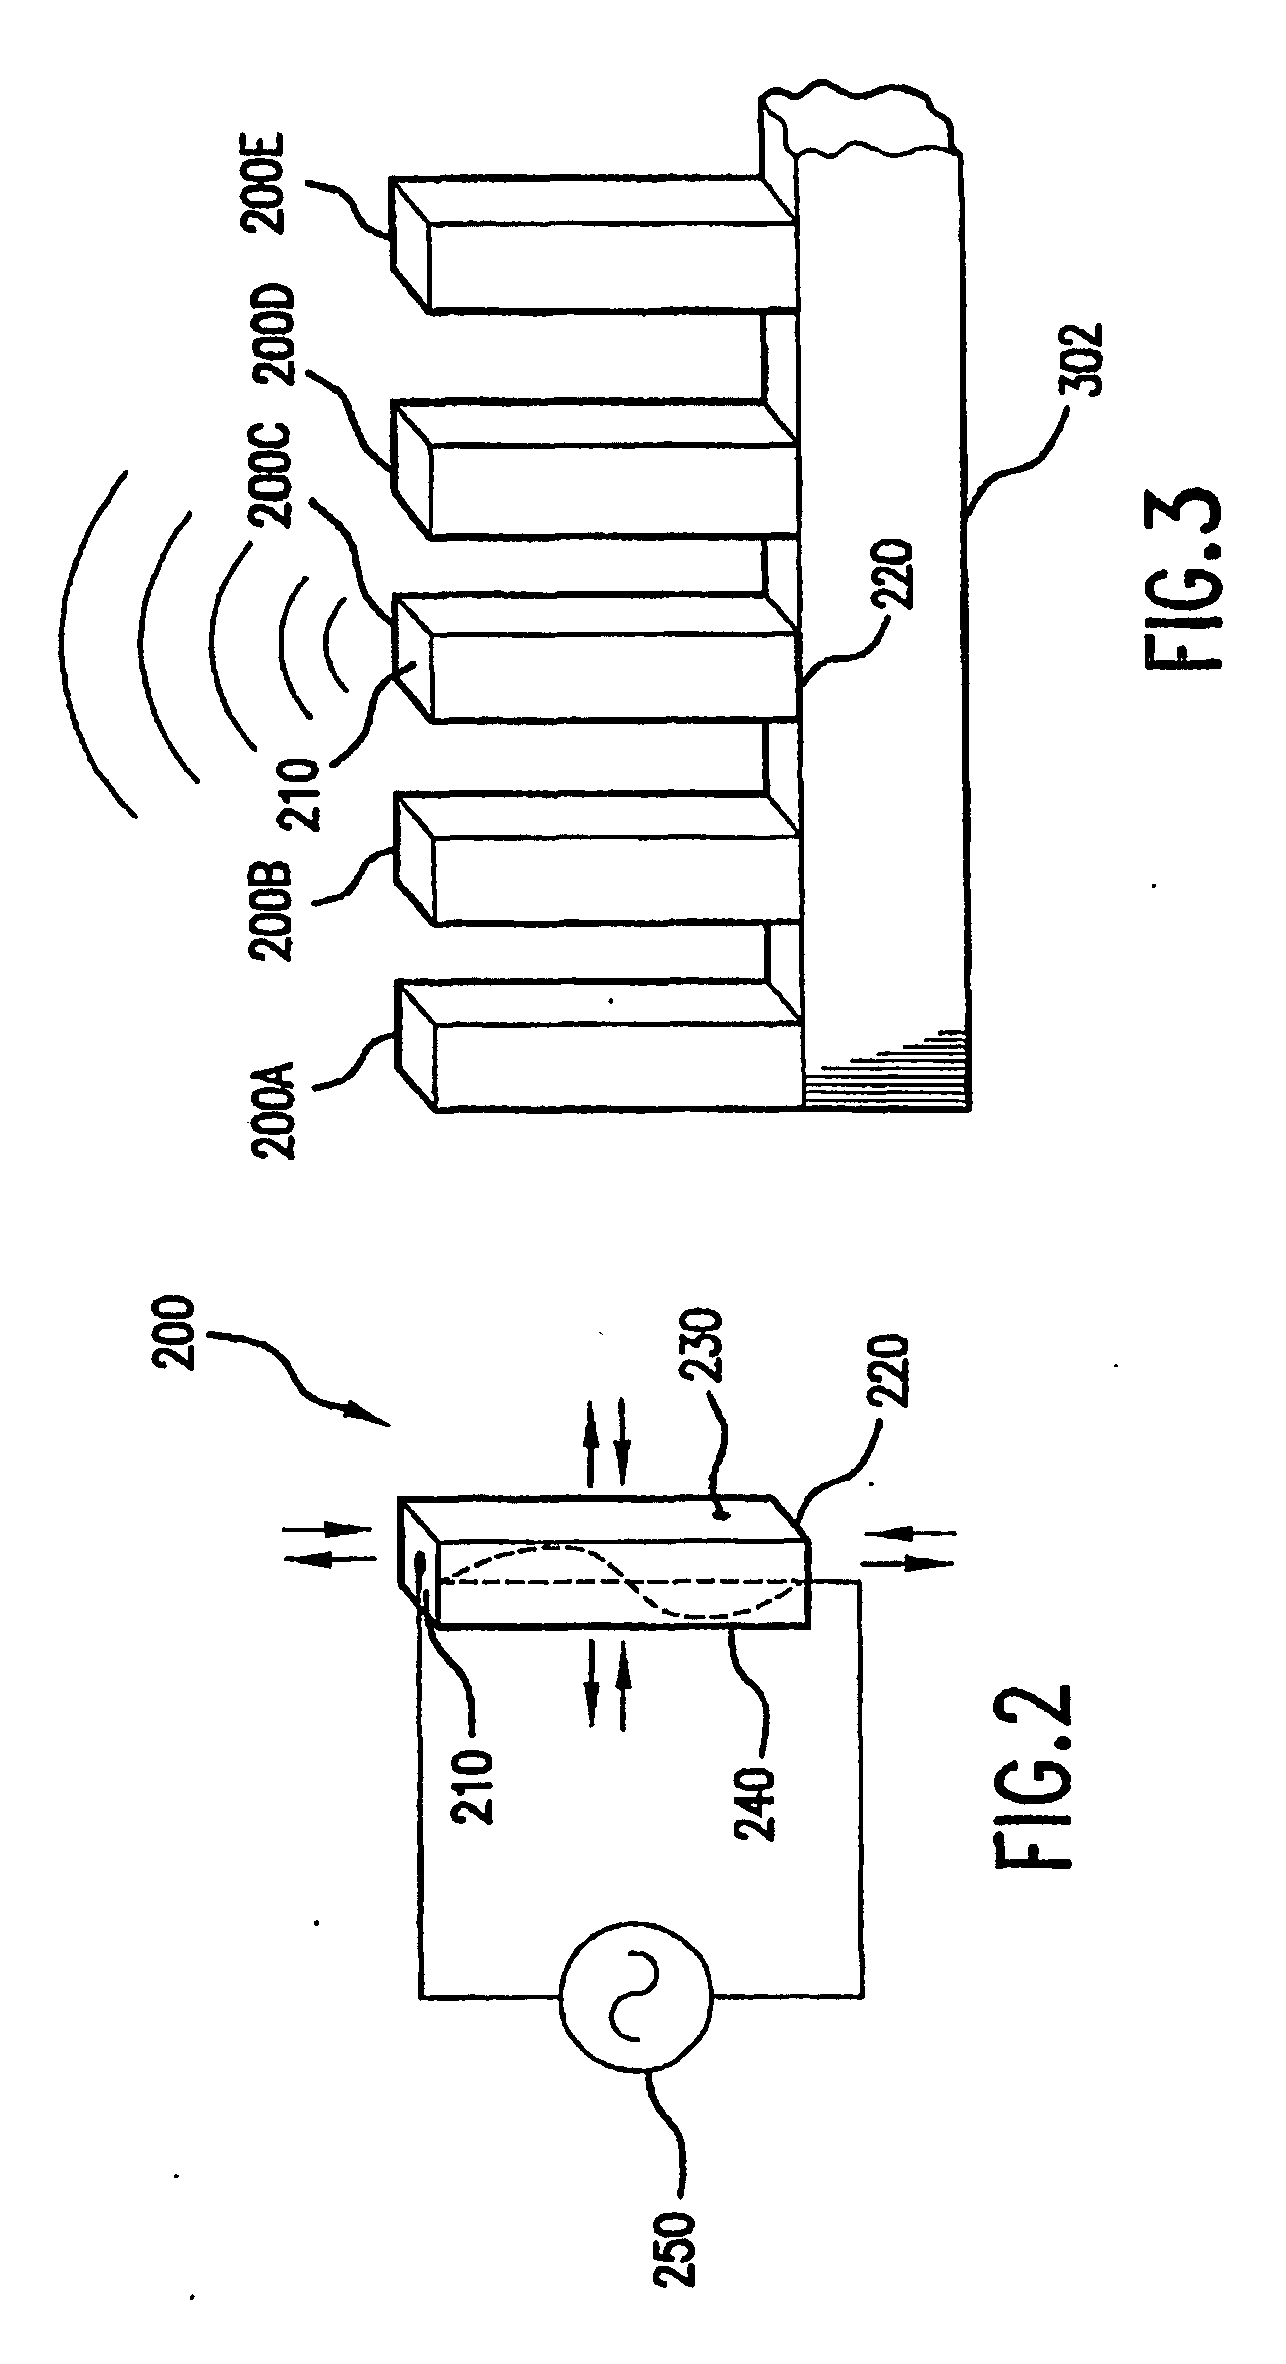 Piezoelectric device and method of manufacturing same